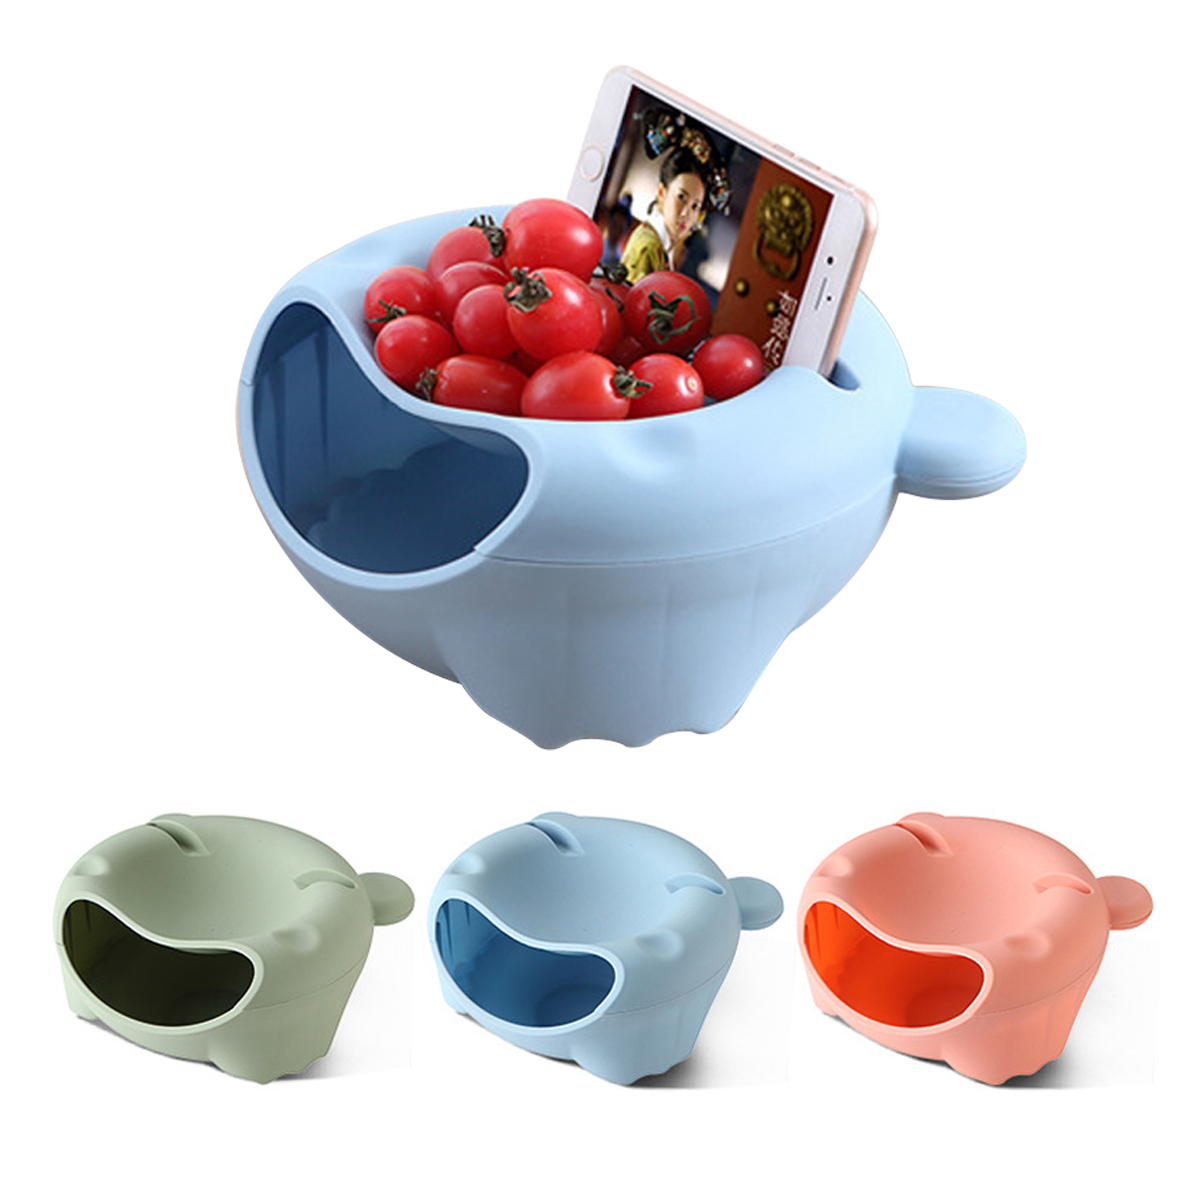 Snack Bowl with Cellphone Holder Slot